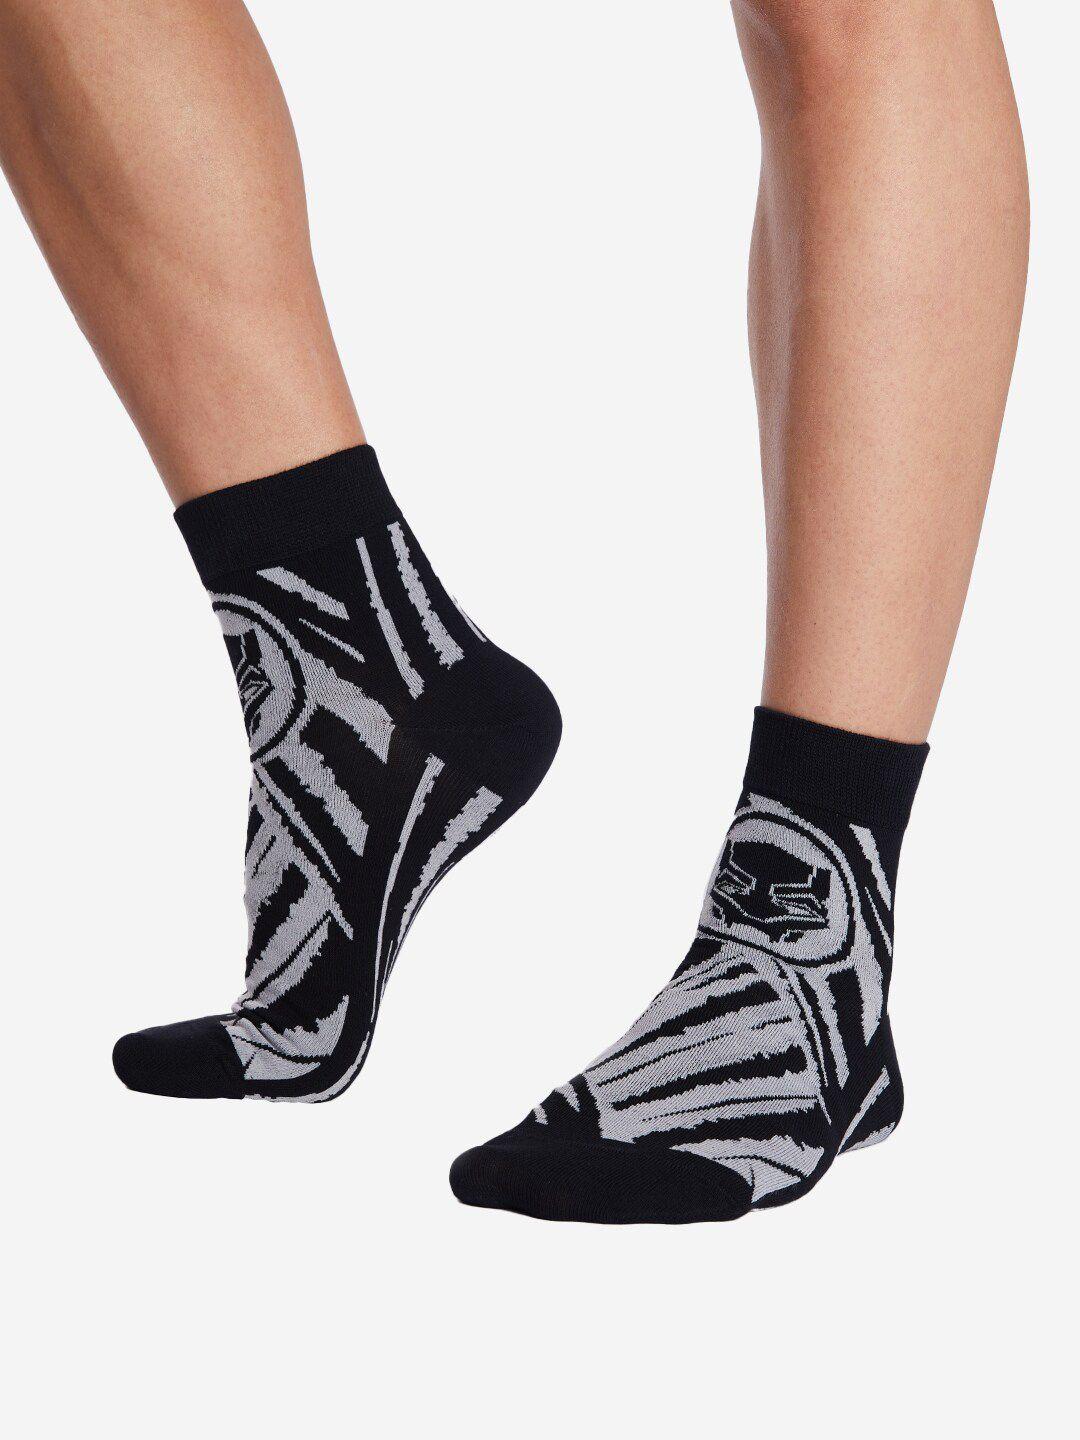 the souled store wakanda forever cotton printed socks